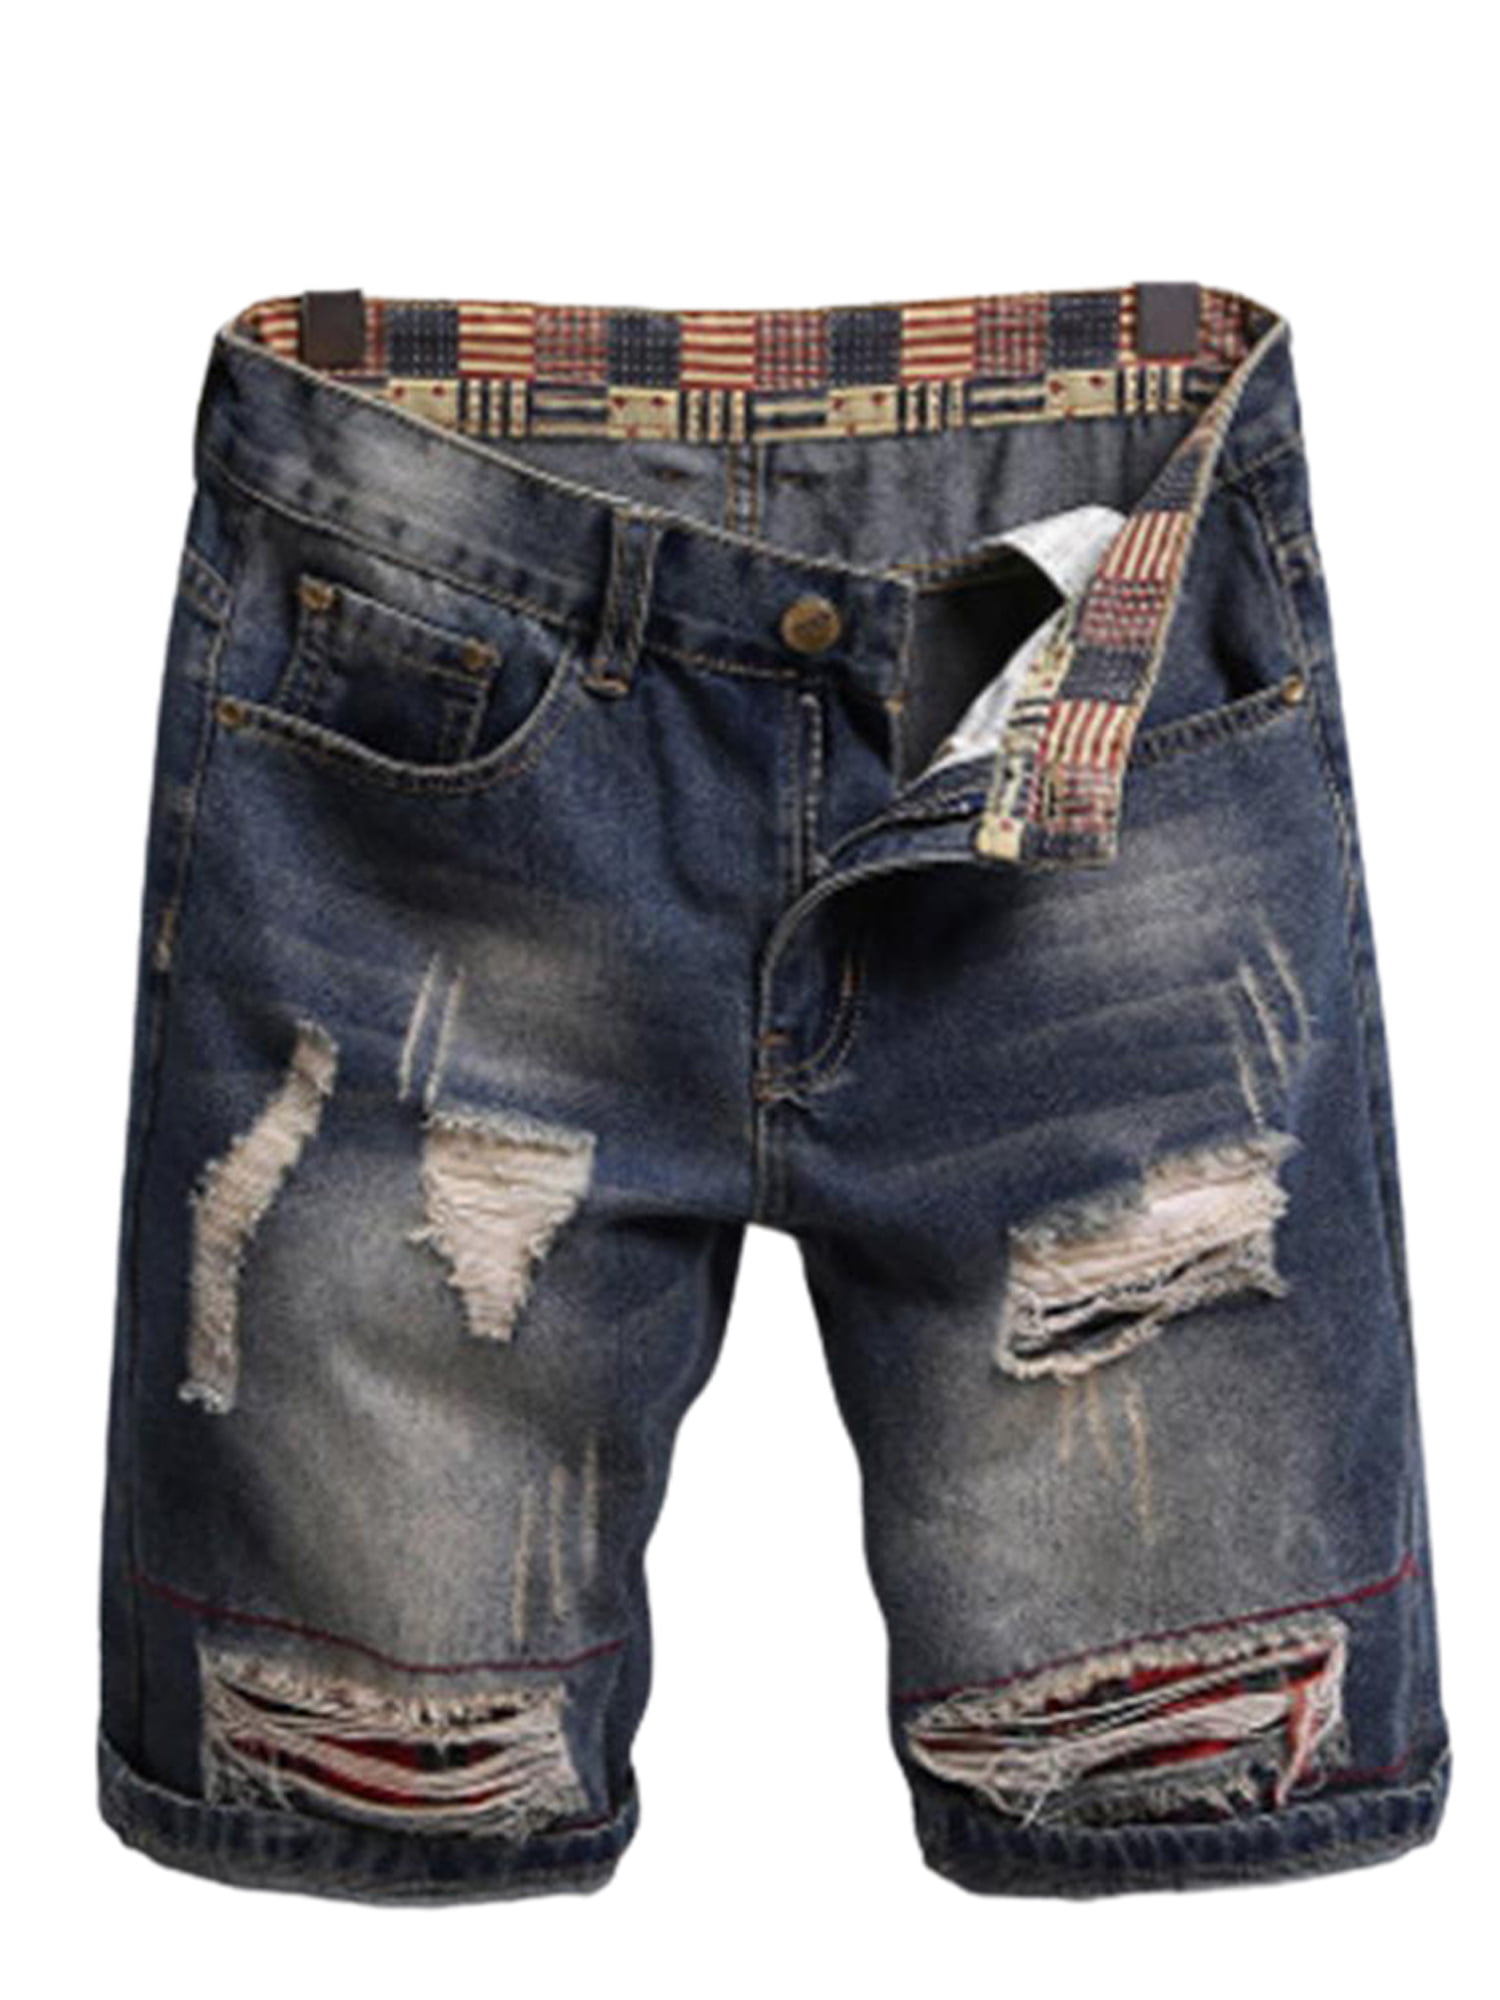 DOINLINE Men's Distressed Jean Shorts Casual Ripped Summer Denim Short Pants with Pockets